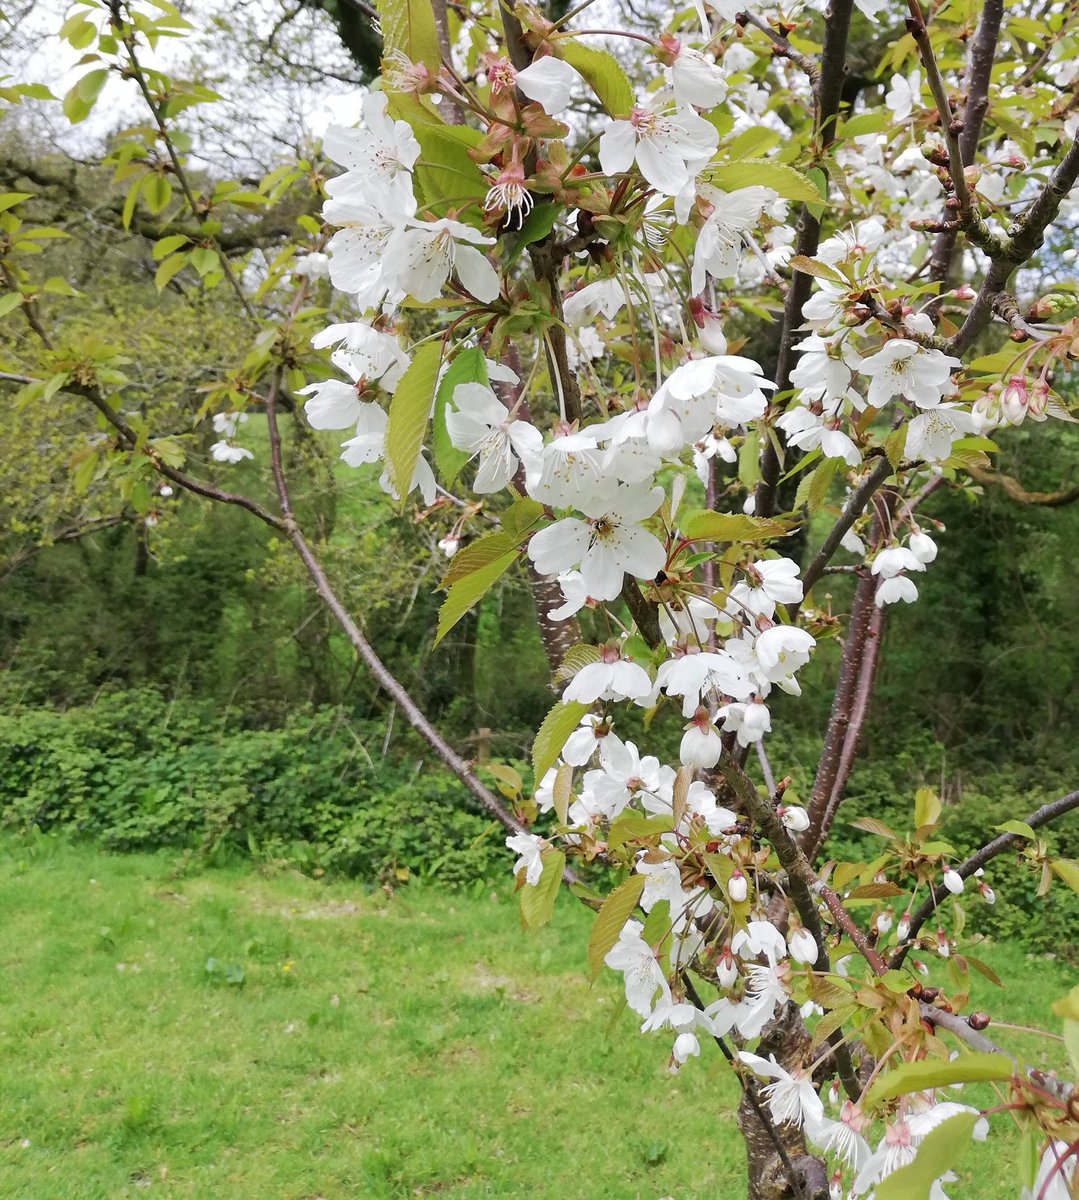 #OrchardBlossomDay starting with #apples Devon Quarrendon & Tom Putt, then Champion #quince, & wild #cherry. We planted this orchard in lock down, it's so nice to see it thriving 💕